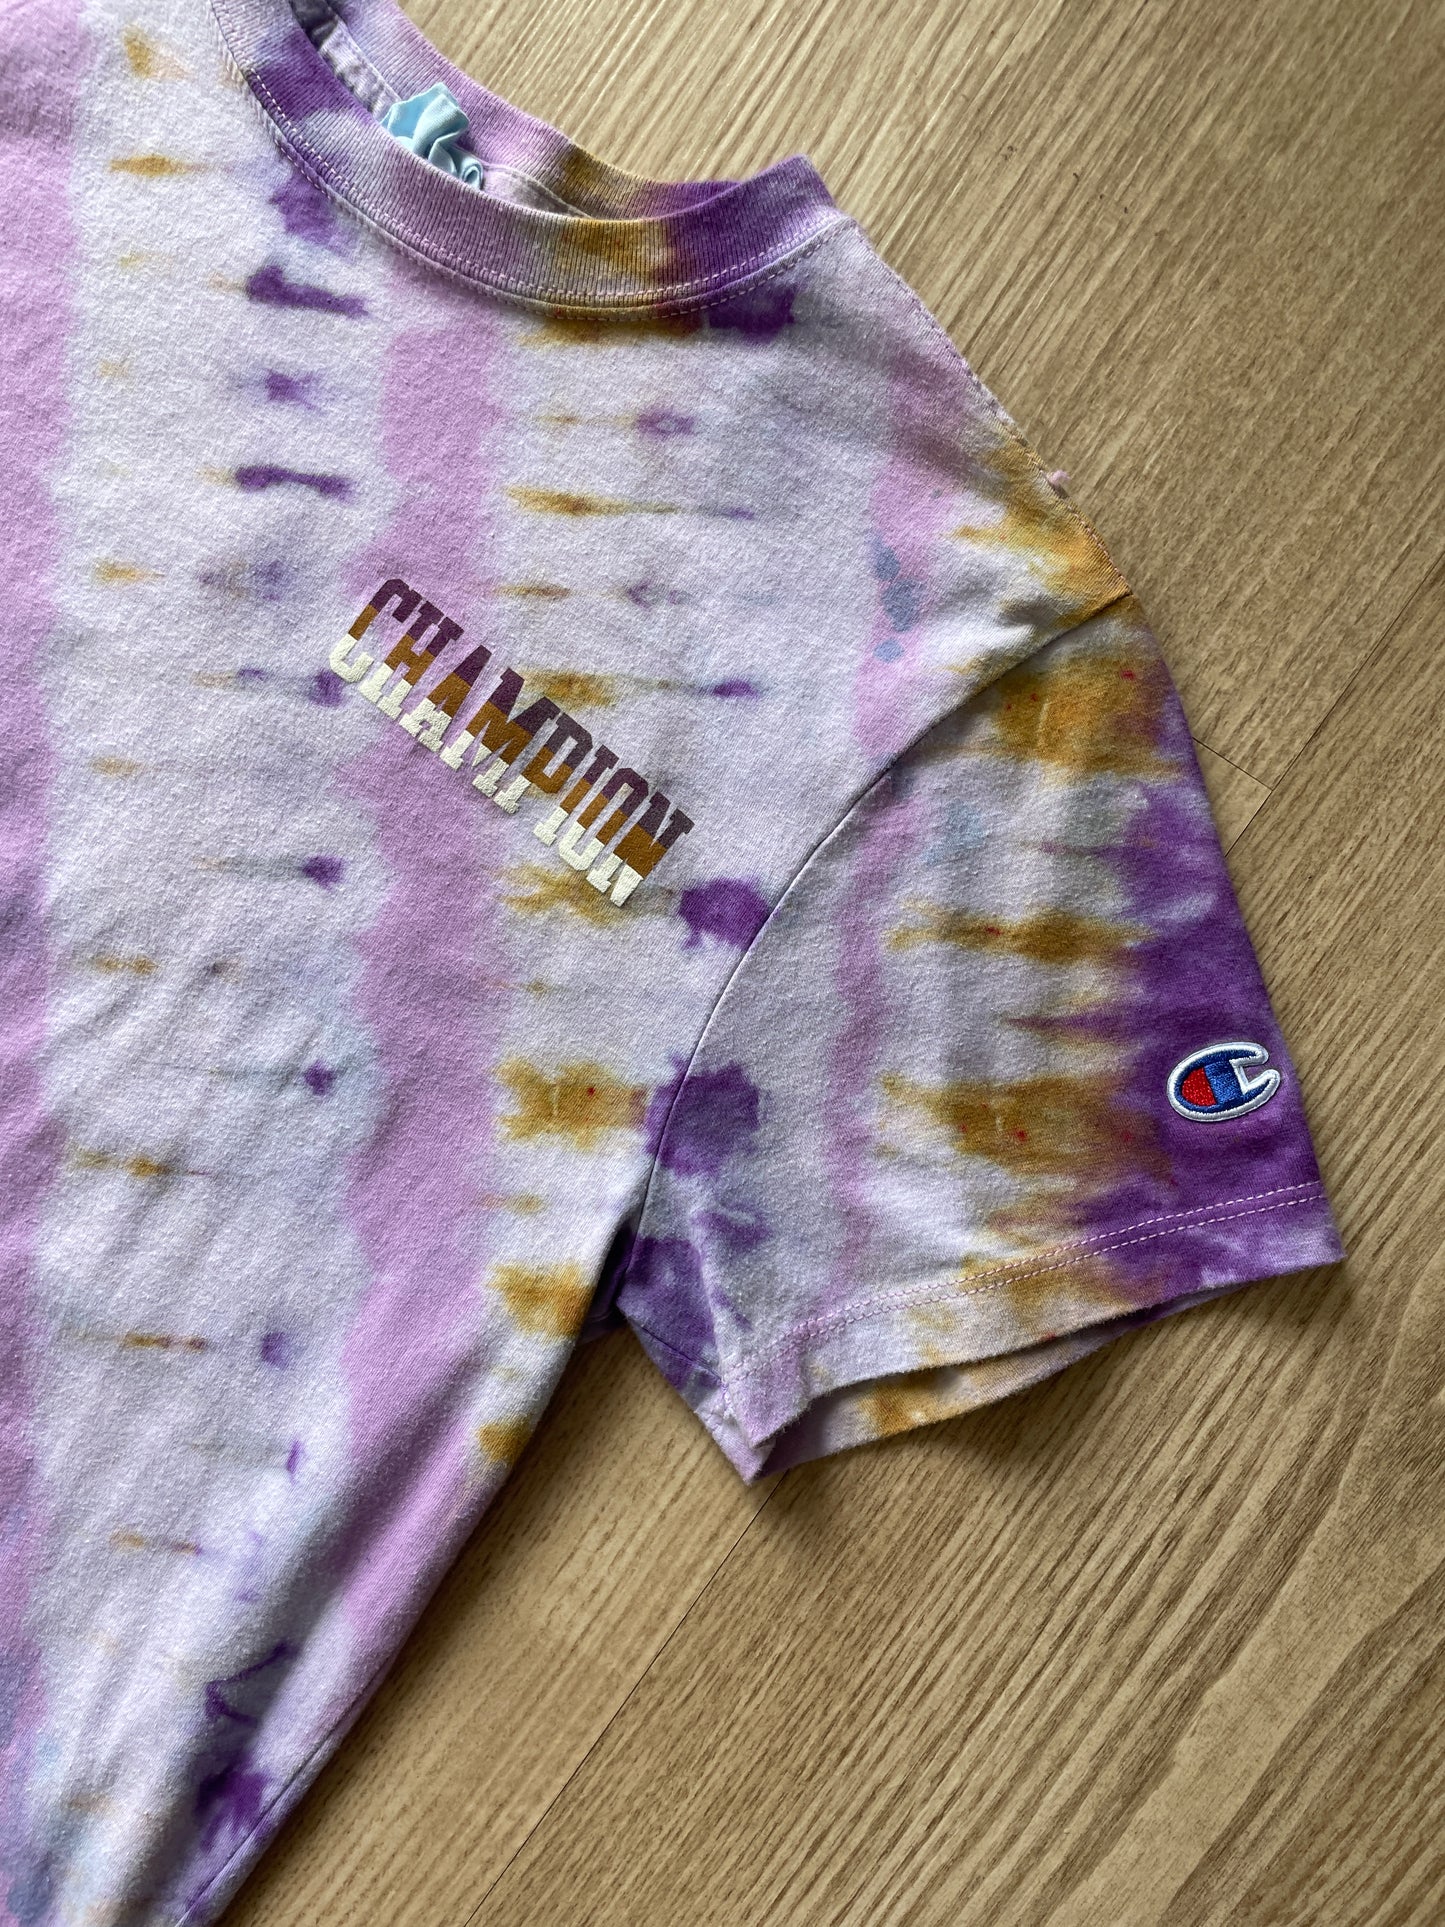 MEDIUM Women’s Champion Handmade Tie Dye T-Shirt | One-Of-a-Kind Pink and Gold Short Sleeve